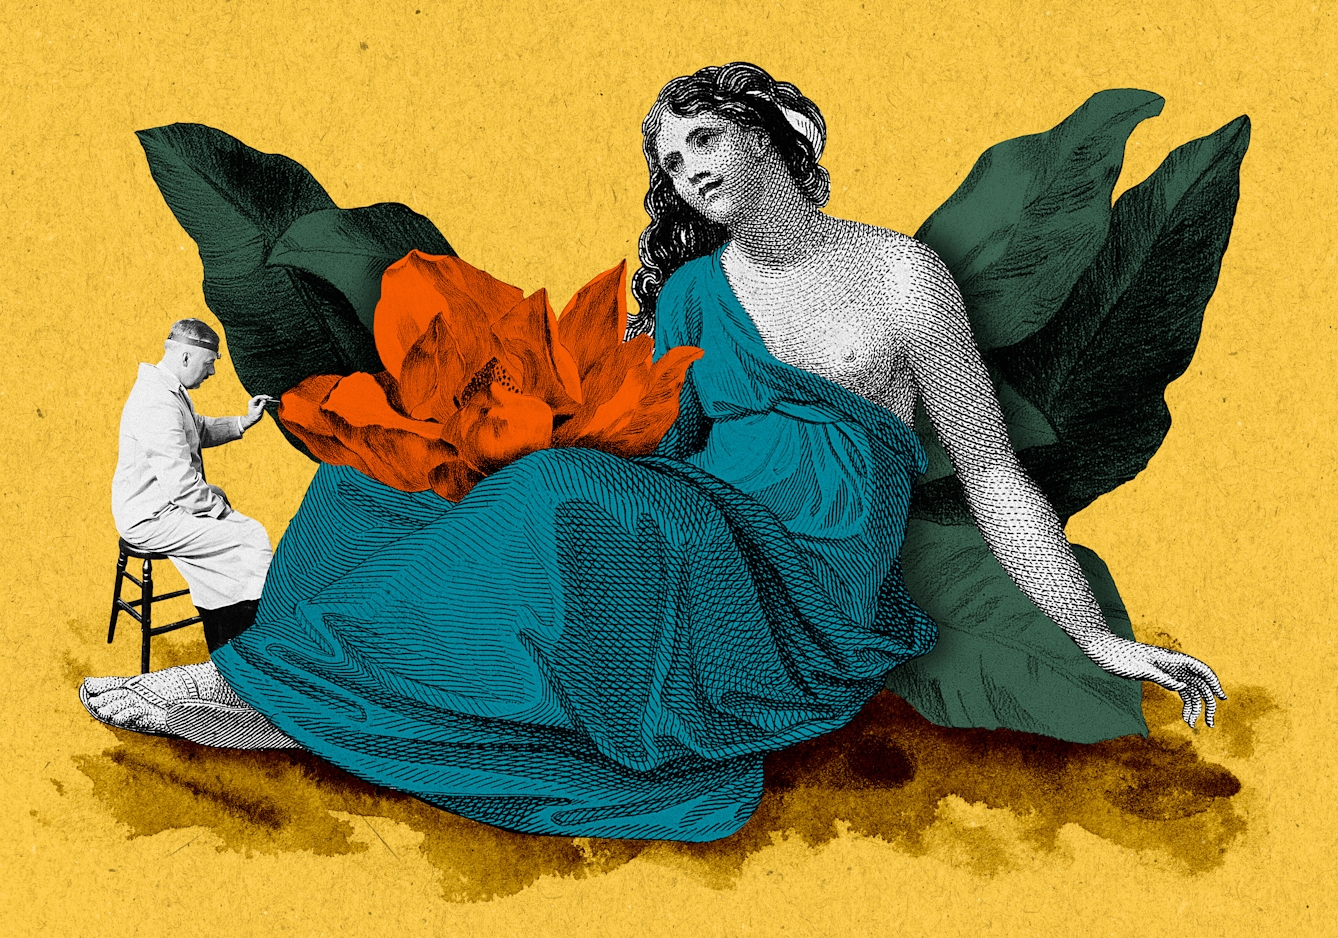 Mixed media collage of a Greco-Roman figure of a woman being examined by a doctor.  The woman is sitting, partly cloaked, and showing part of her torso as she leans backwards.  On her lap is a large flower. The image has been created from colourised black and white assets using orange, blue and green tones, and sits on a yellow background where the floor has been painted with watercolour.